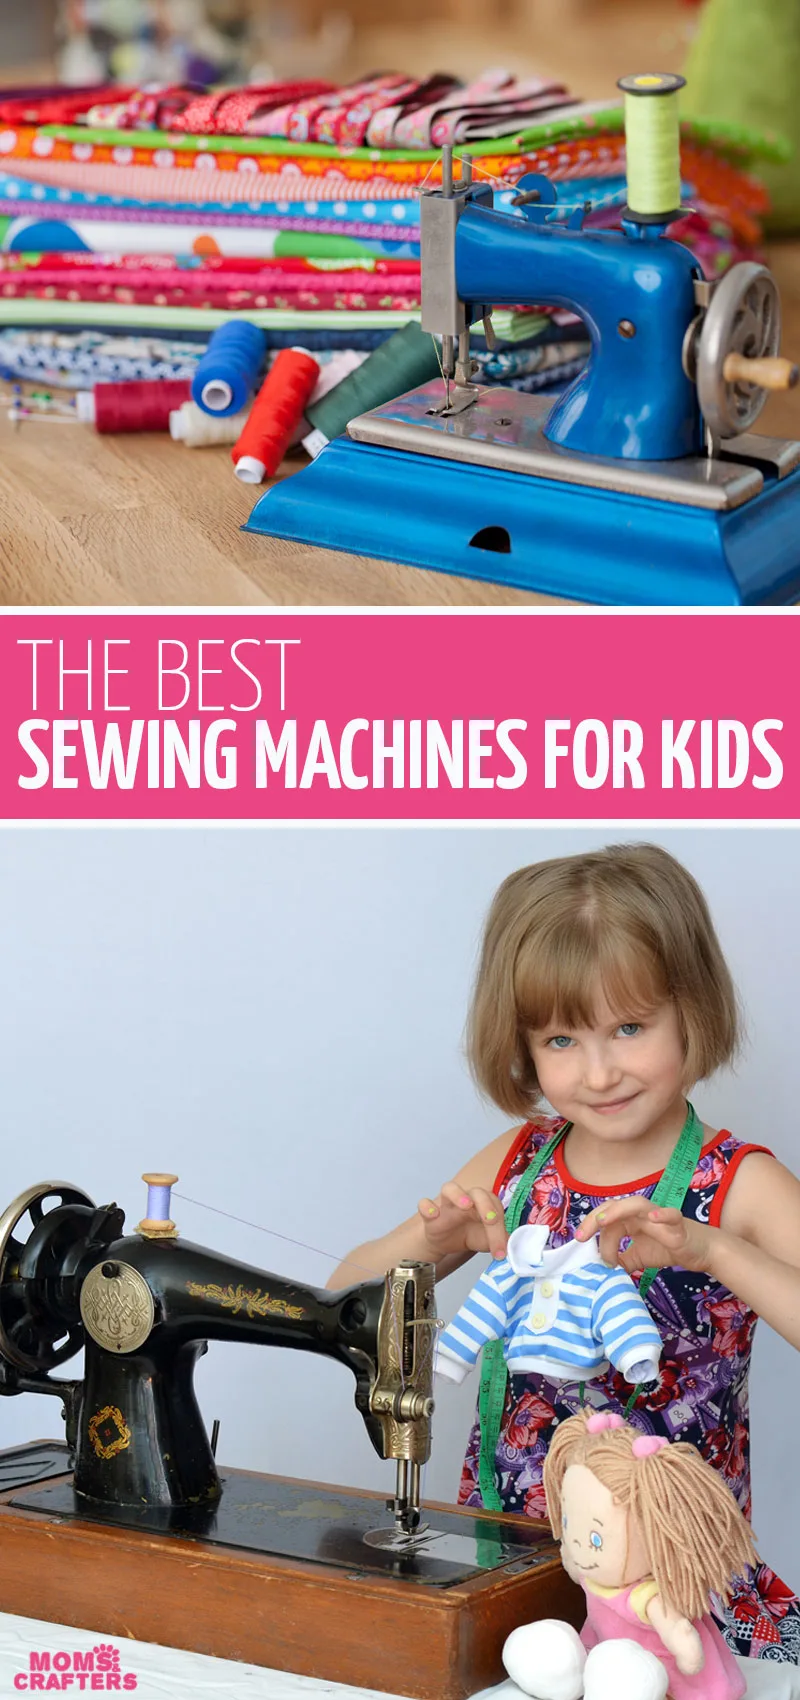 Click for the best sewing machine for kids - both toy machines that work and REAL sewing machines for beginners that are good for kids too! You can teach kids to sew pretty young and these are the best tips and machines for children. 